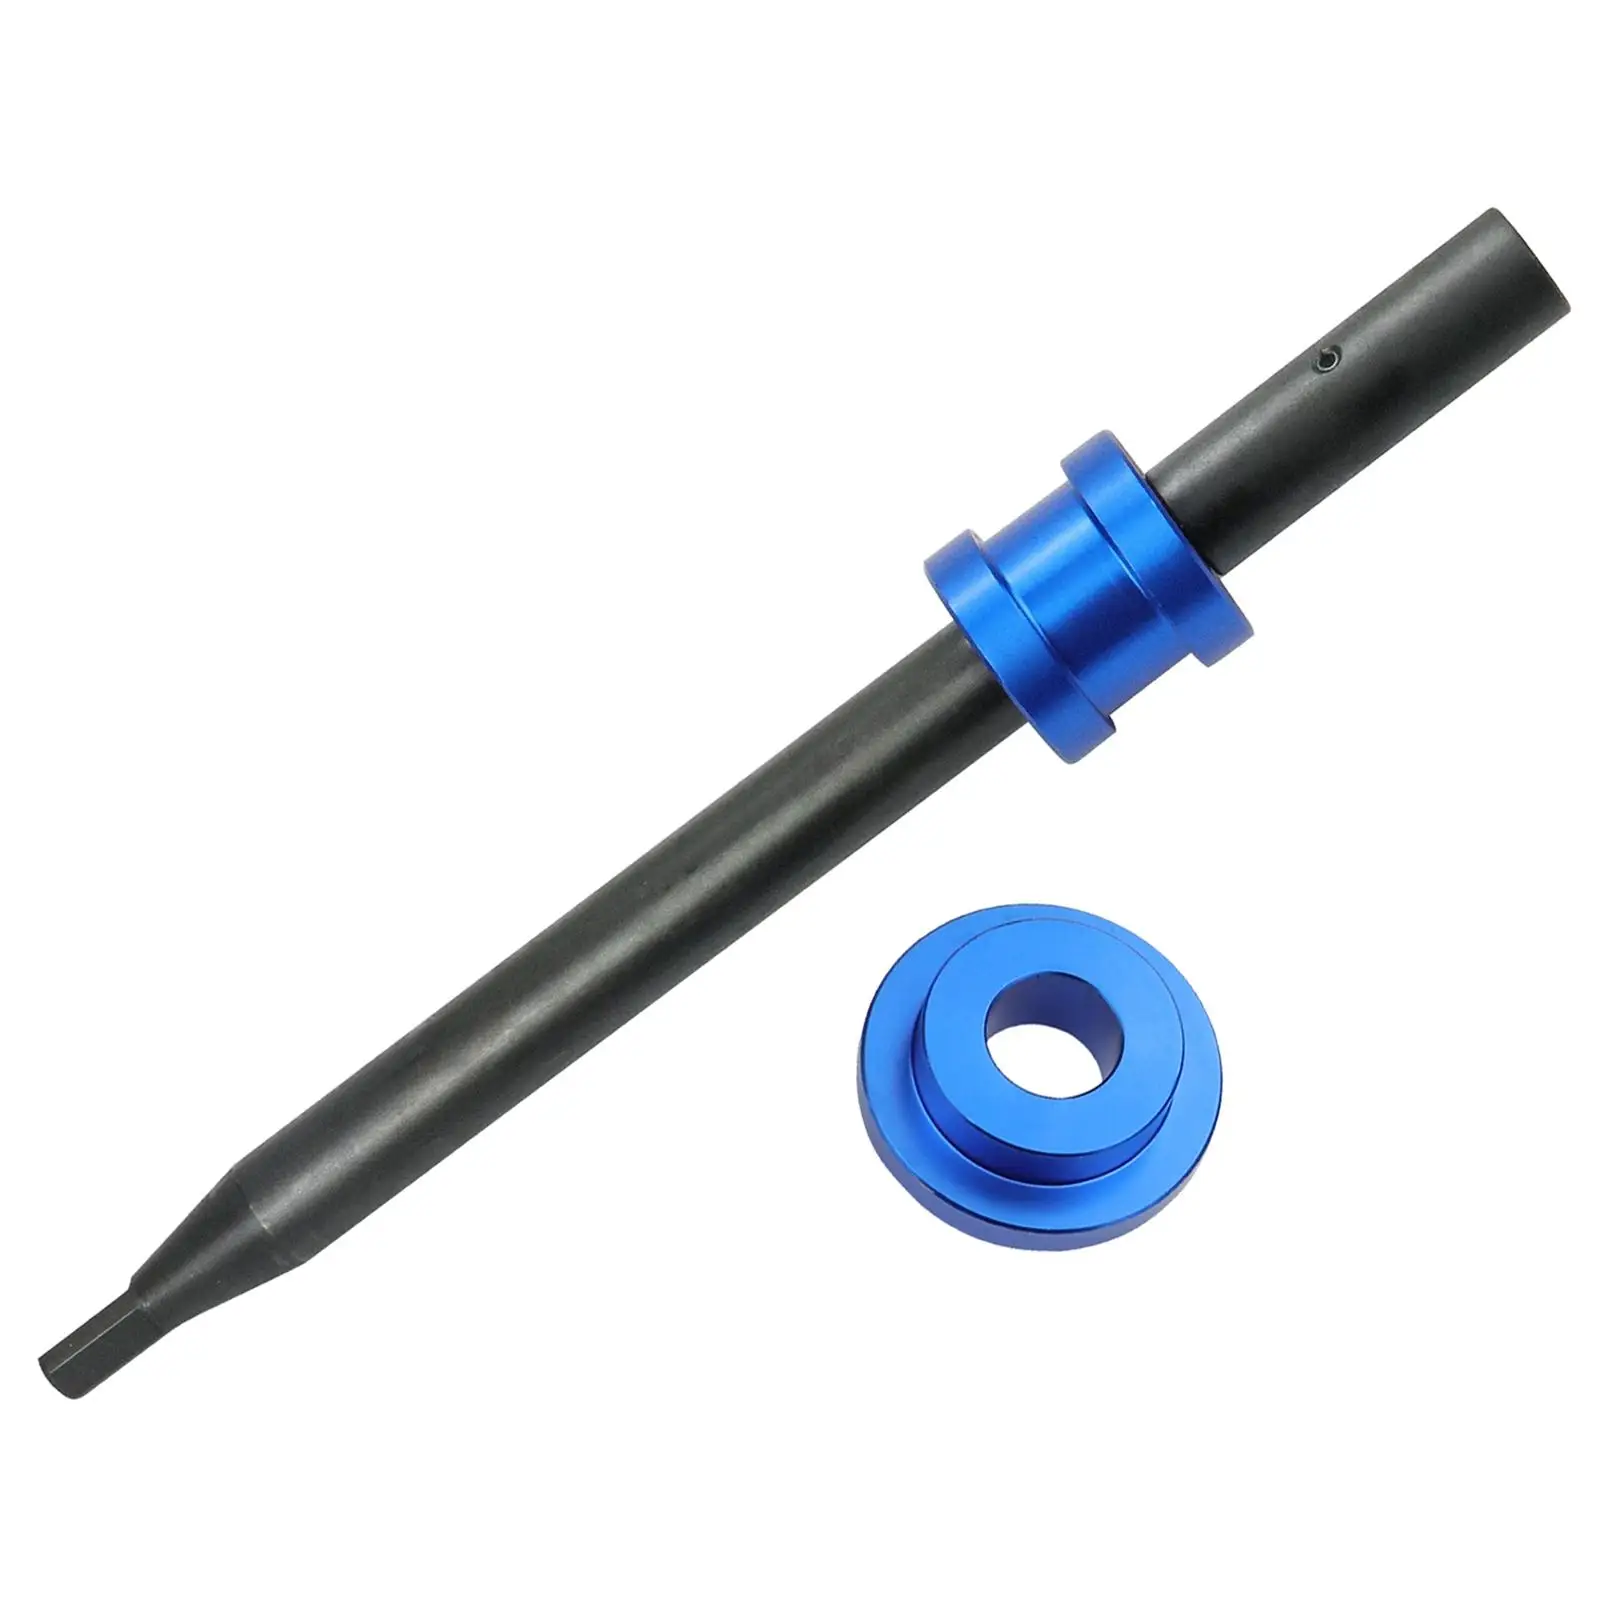 Engine Oil Pump Primer Tool Replaces Fits for V6 V8 Small